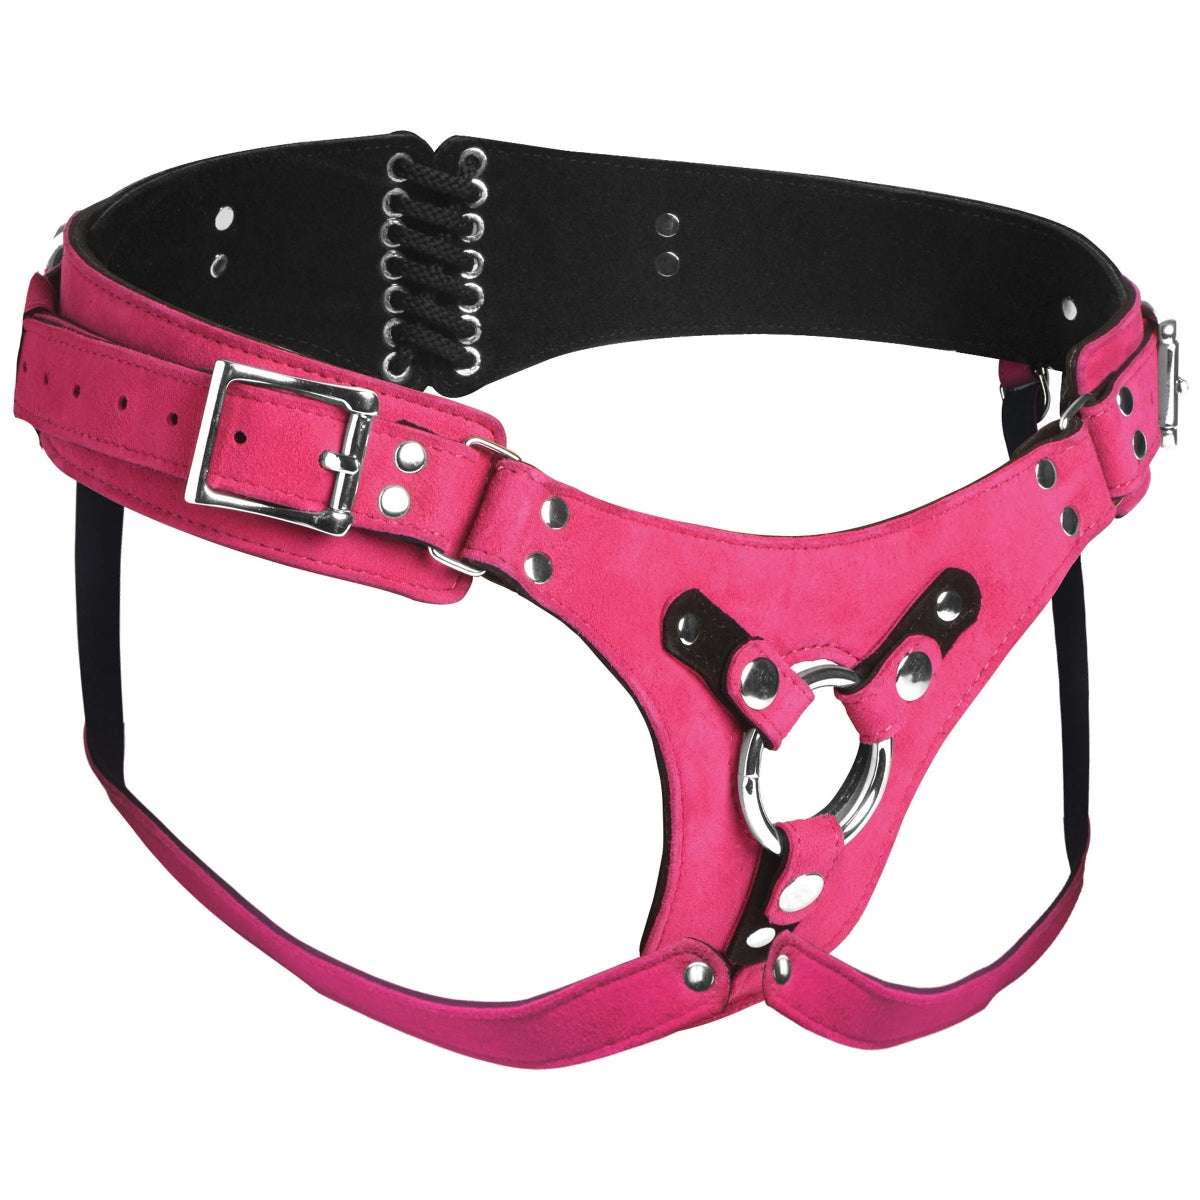 Strap U Bodice Deluxe Leather Corset Harness Pink